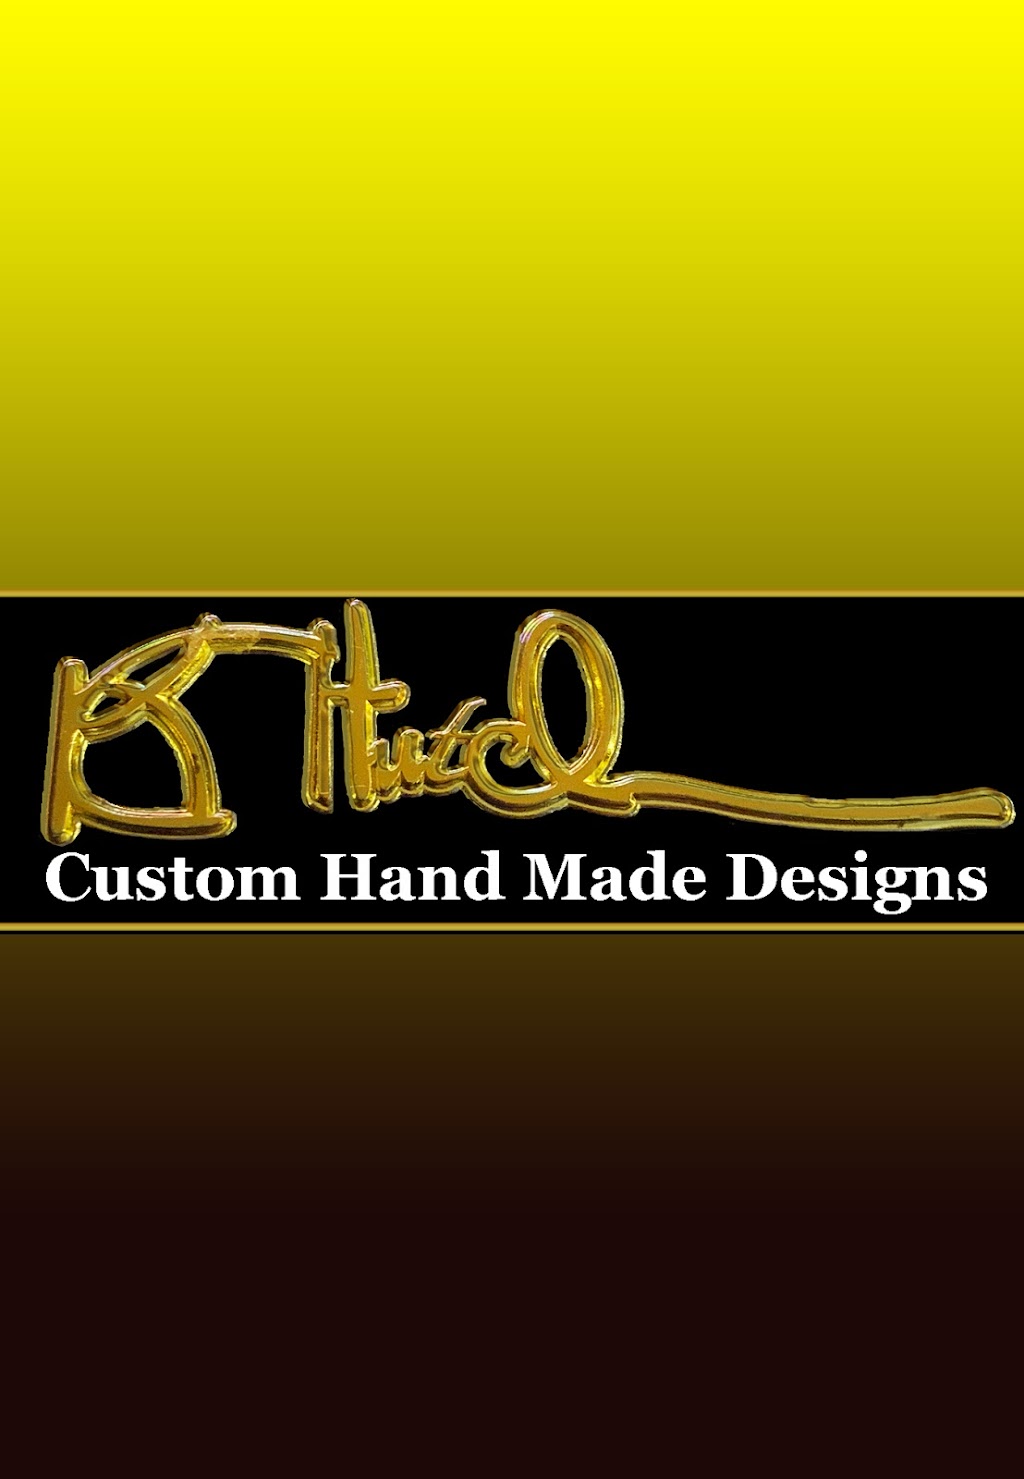 khutchdesigns | 14845 231st St, Queens, NY 11413, USA | Phone: (858) 848-7352